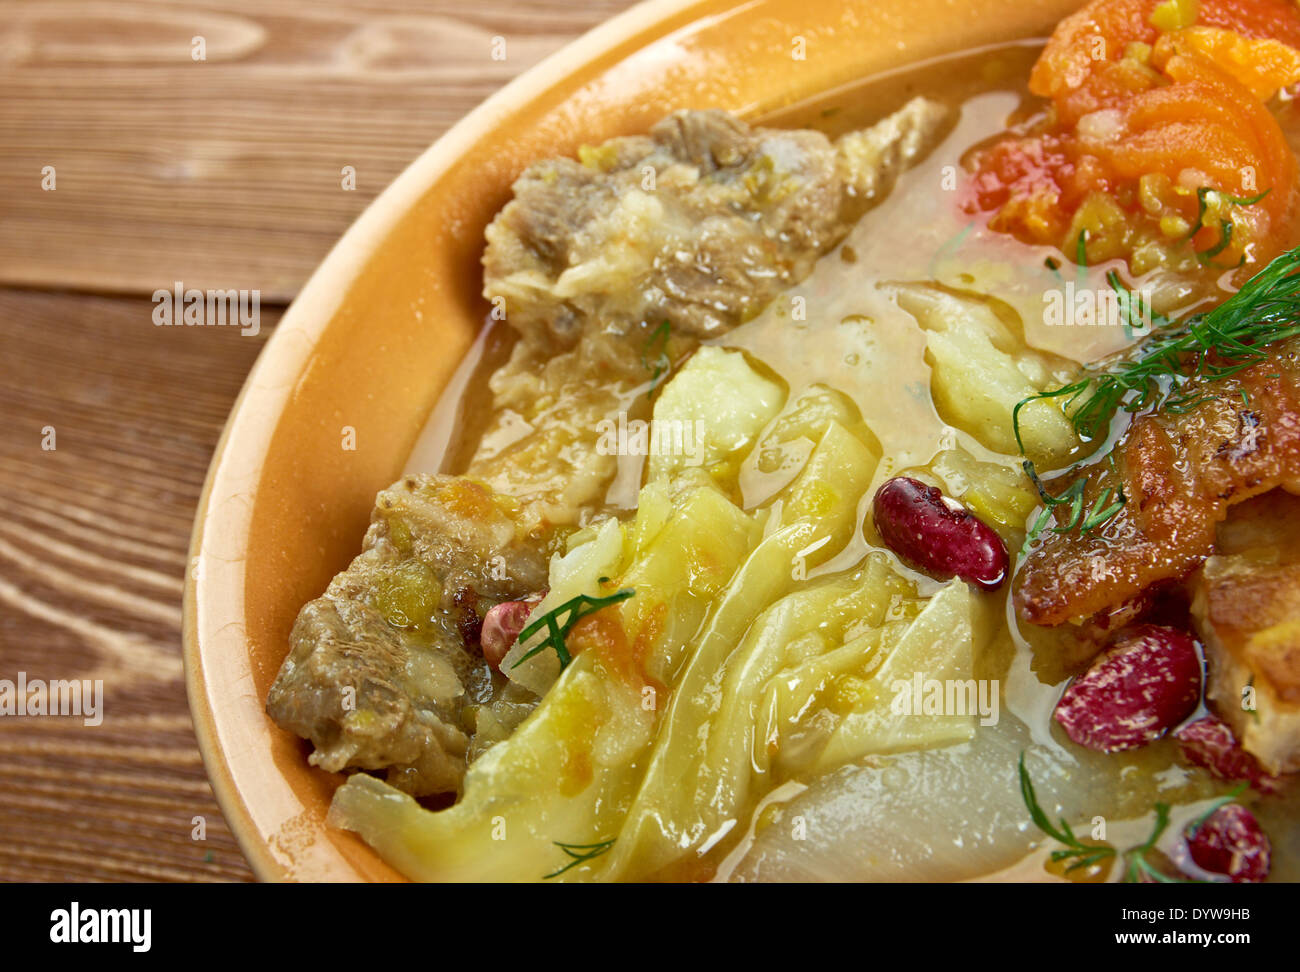 Olla podrida - Spanish stew made from pork and beans, Stock Photo